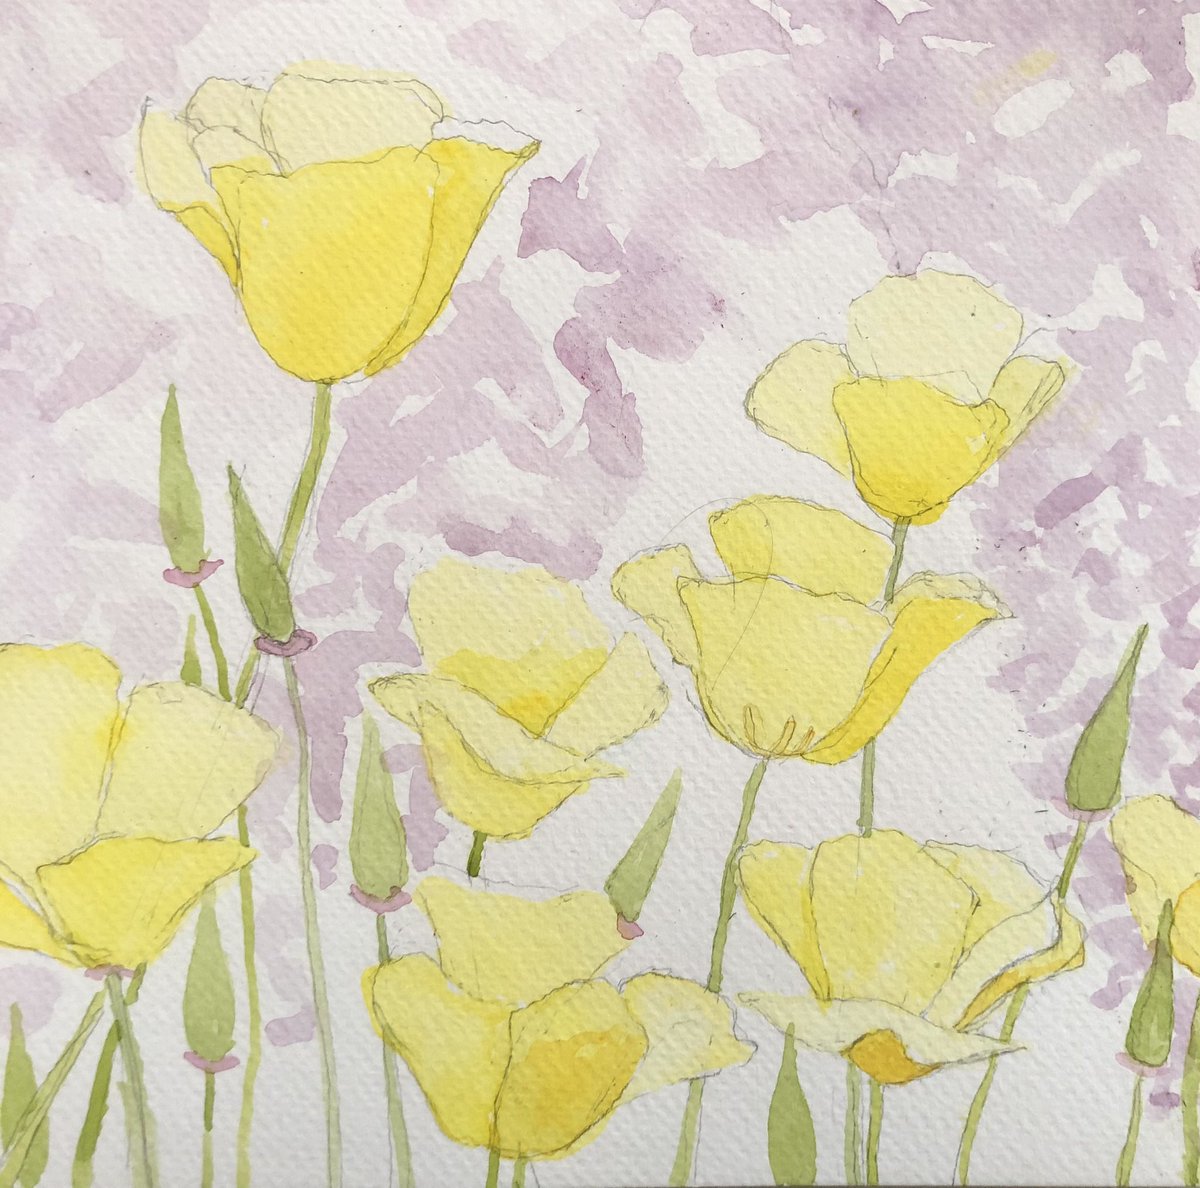 Two days in the life of a new watercolor. 

Pale yellow poppies
8” x 8”
2024 all rights reserved